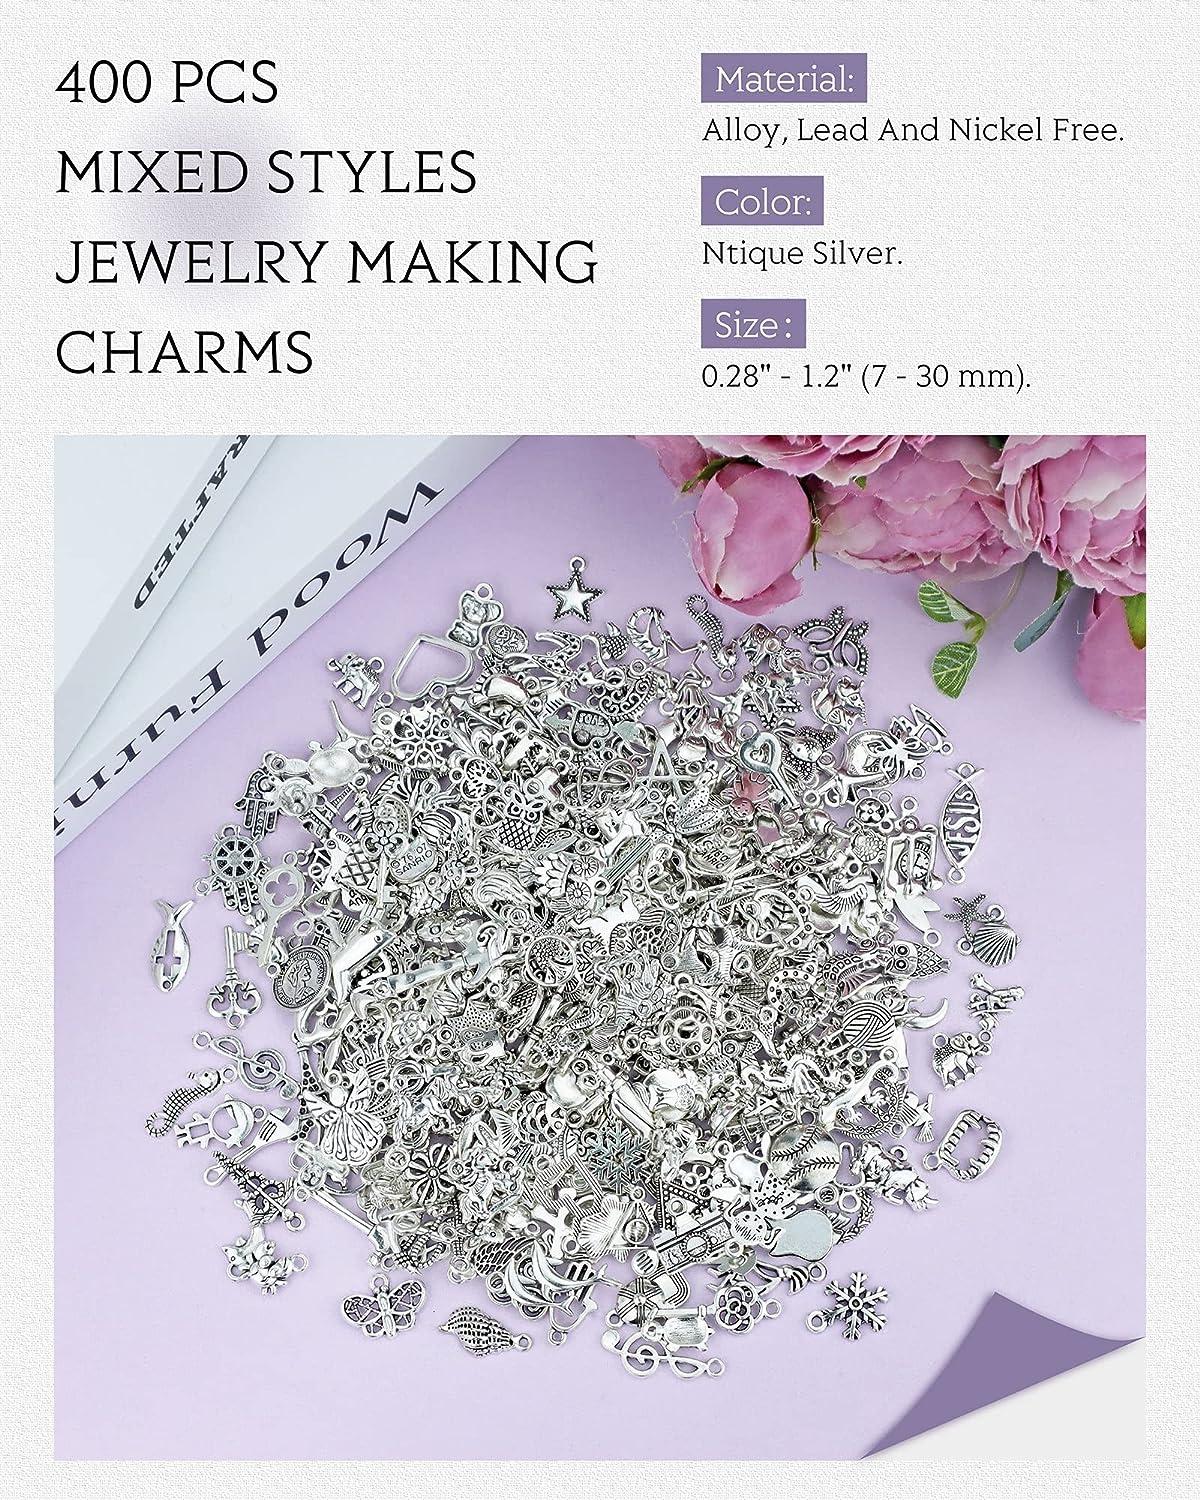  JIALEEY Wholesale Bulk Lots Jewelry Making Silver Charms Mixed  Smooth Tibetan Silver Metal Charms Pendants DIY for Necklace Bracelet  Jewelry Making and Crafting, 100 PCS : JIALEEY: Arts, Crafts & Sewing